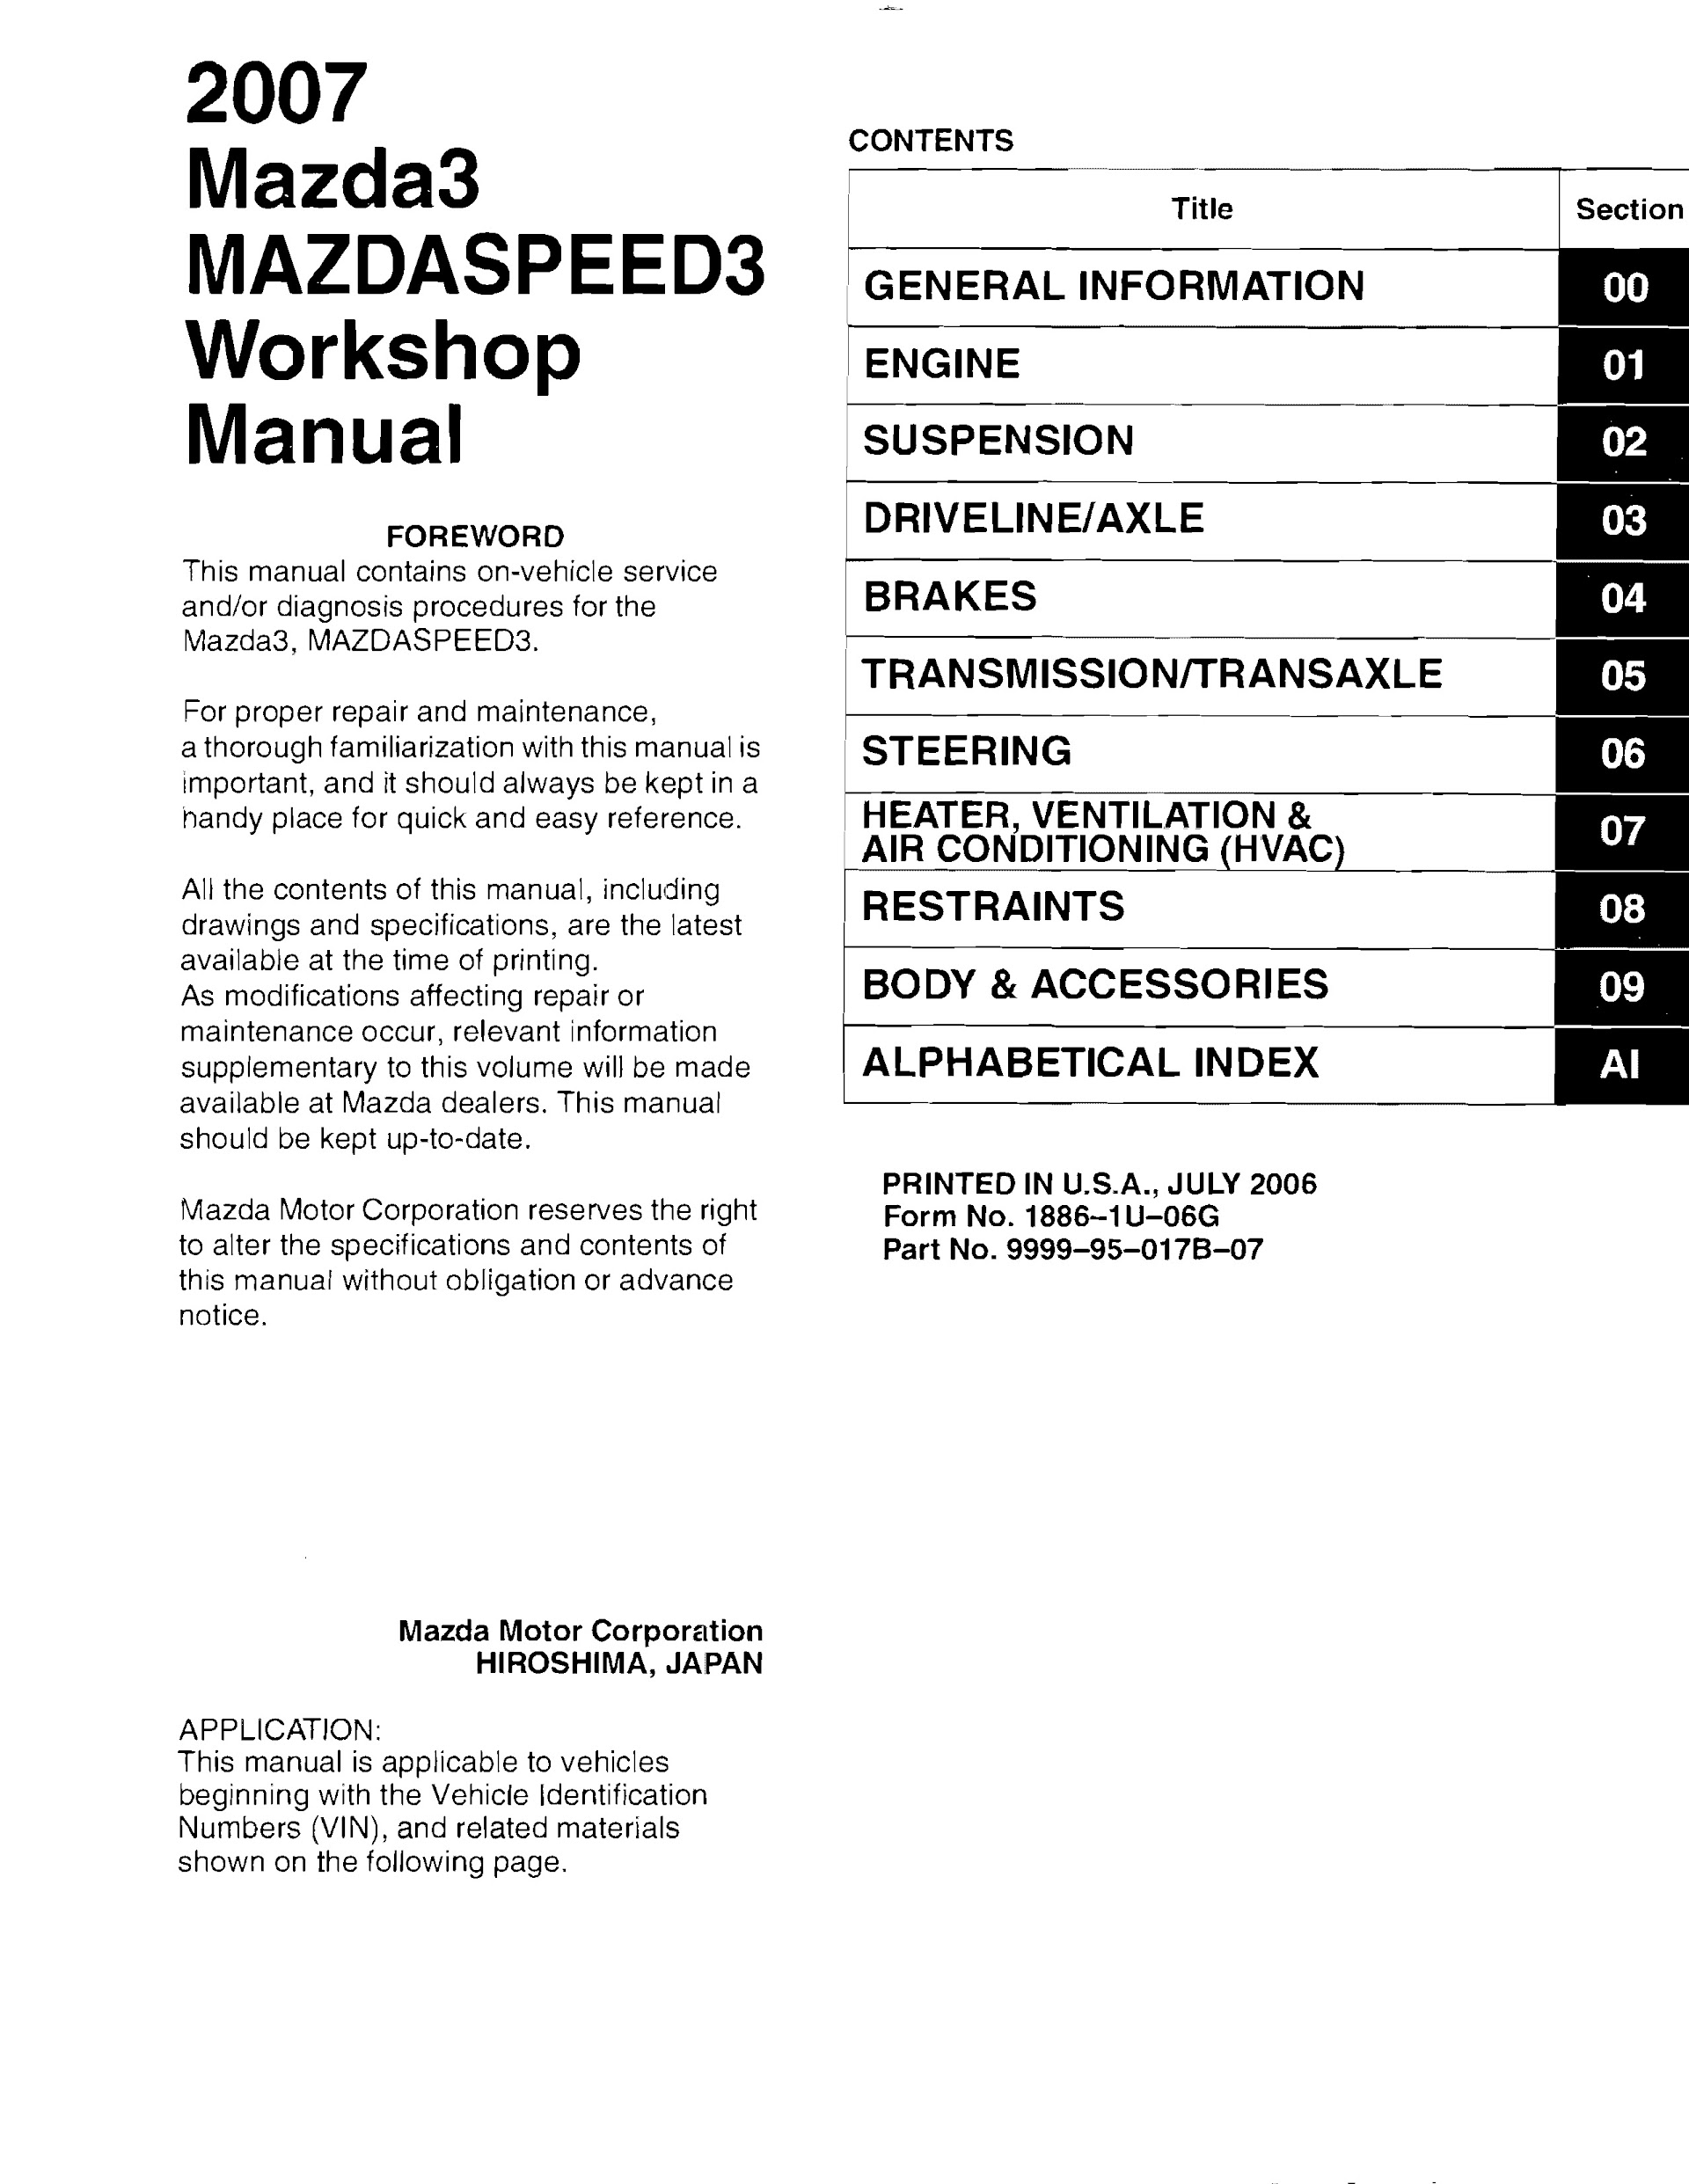 table of contents 2007 Mazda3 and Mazdaspeed3 Repair Manual